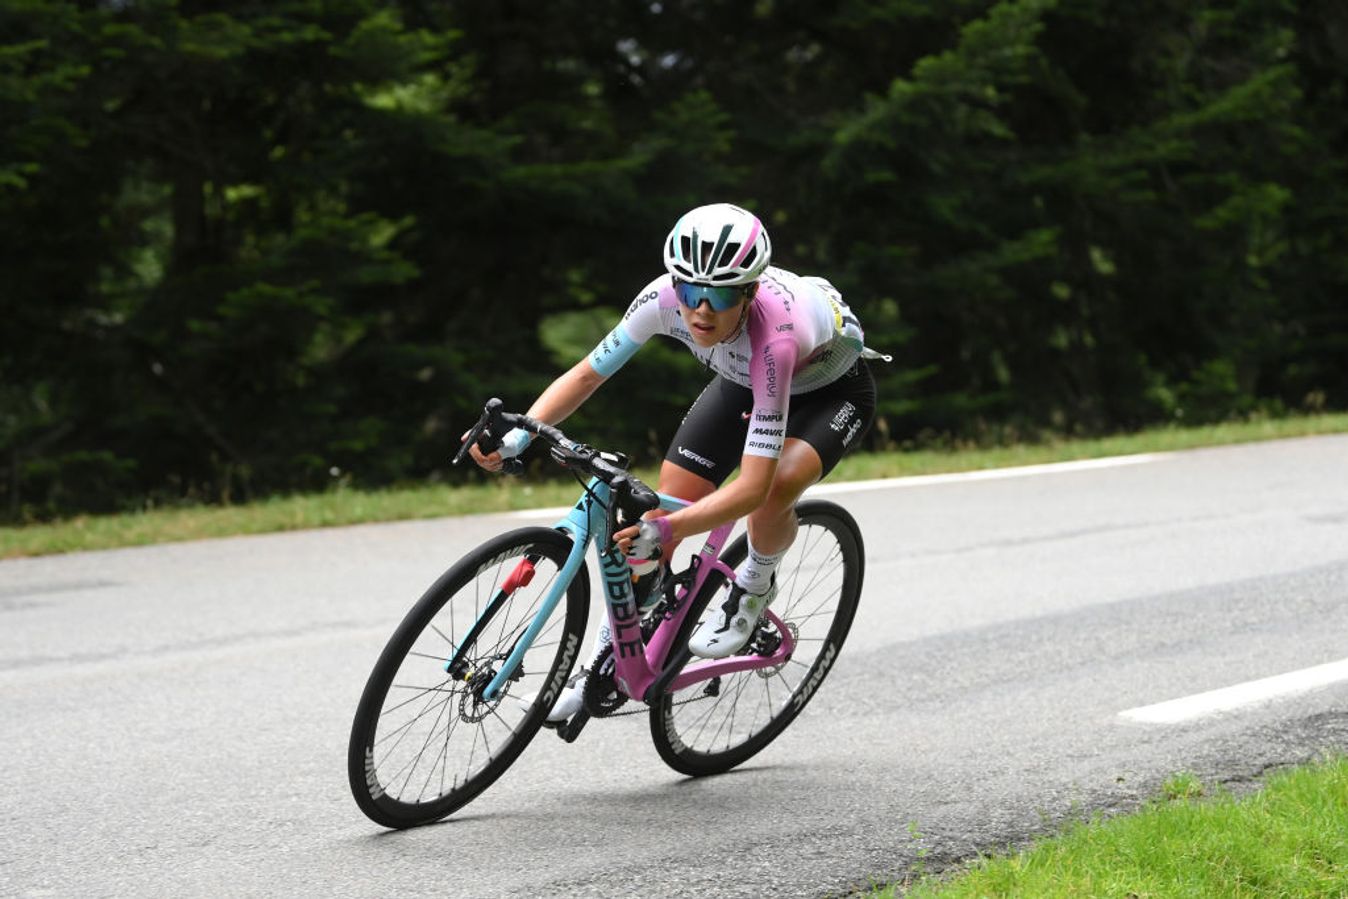 Ella Wyllie finished second in the young rider standings at the Tour de France Femmes